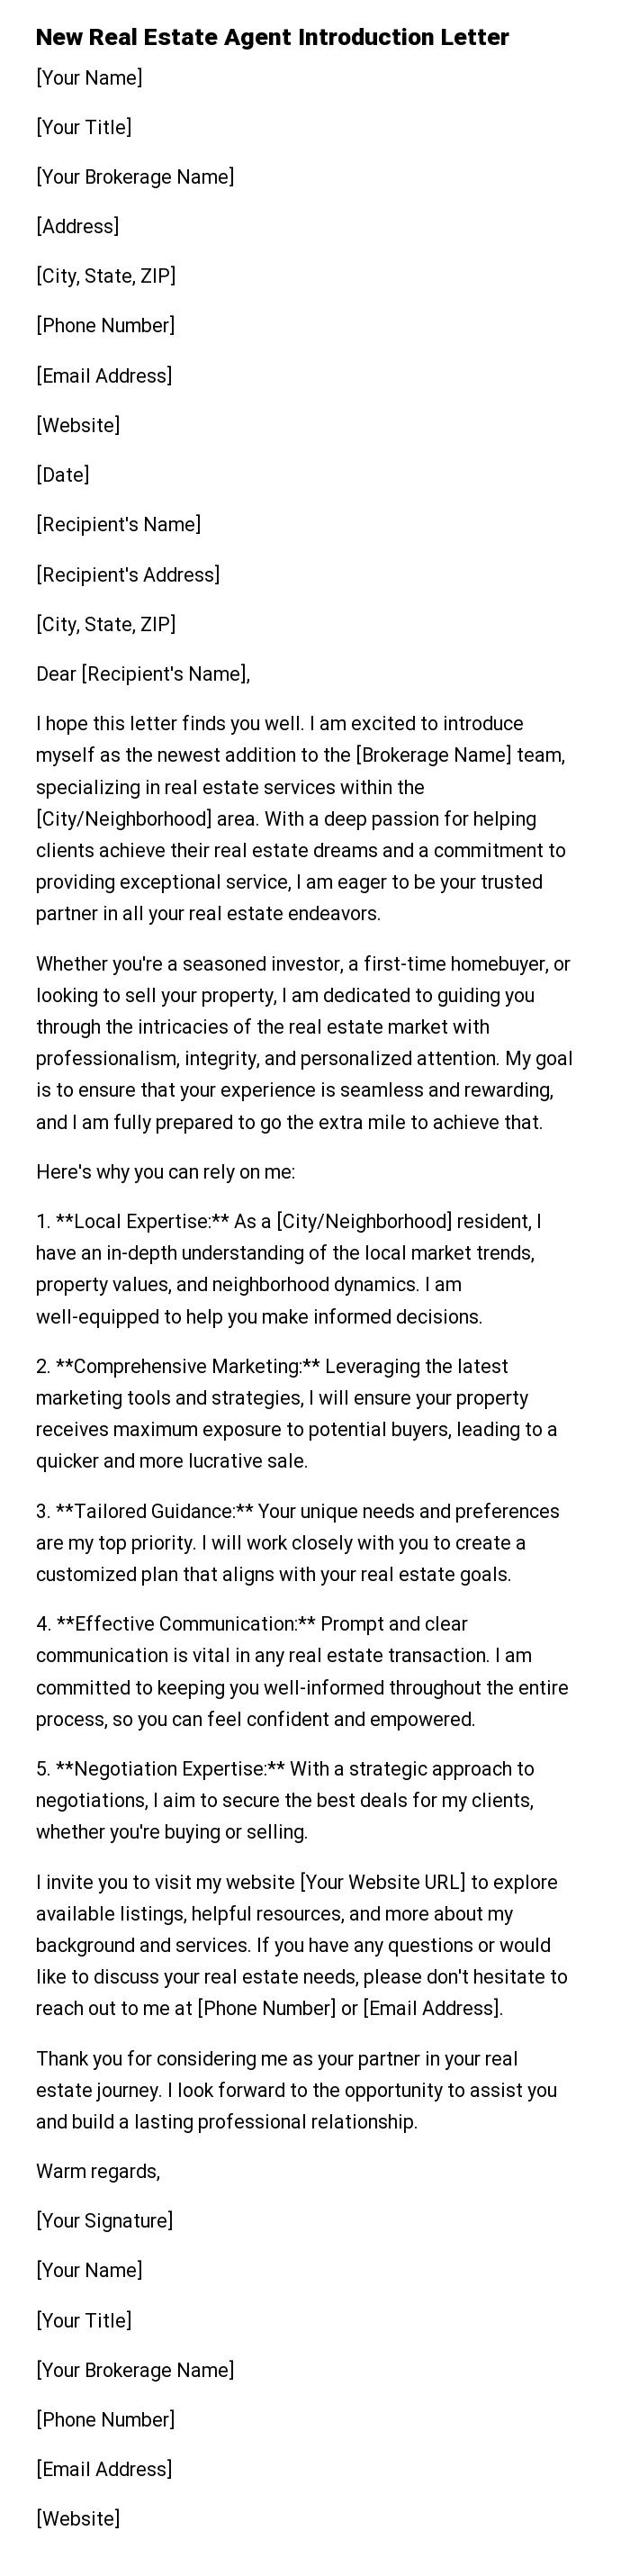 New Real Estate Agent Introduction Letter